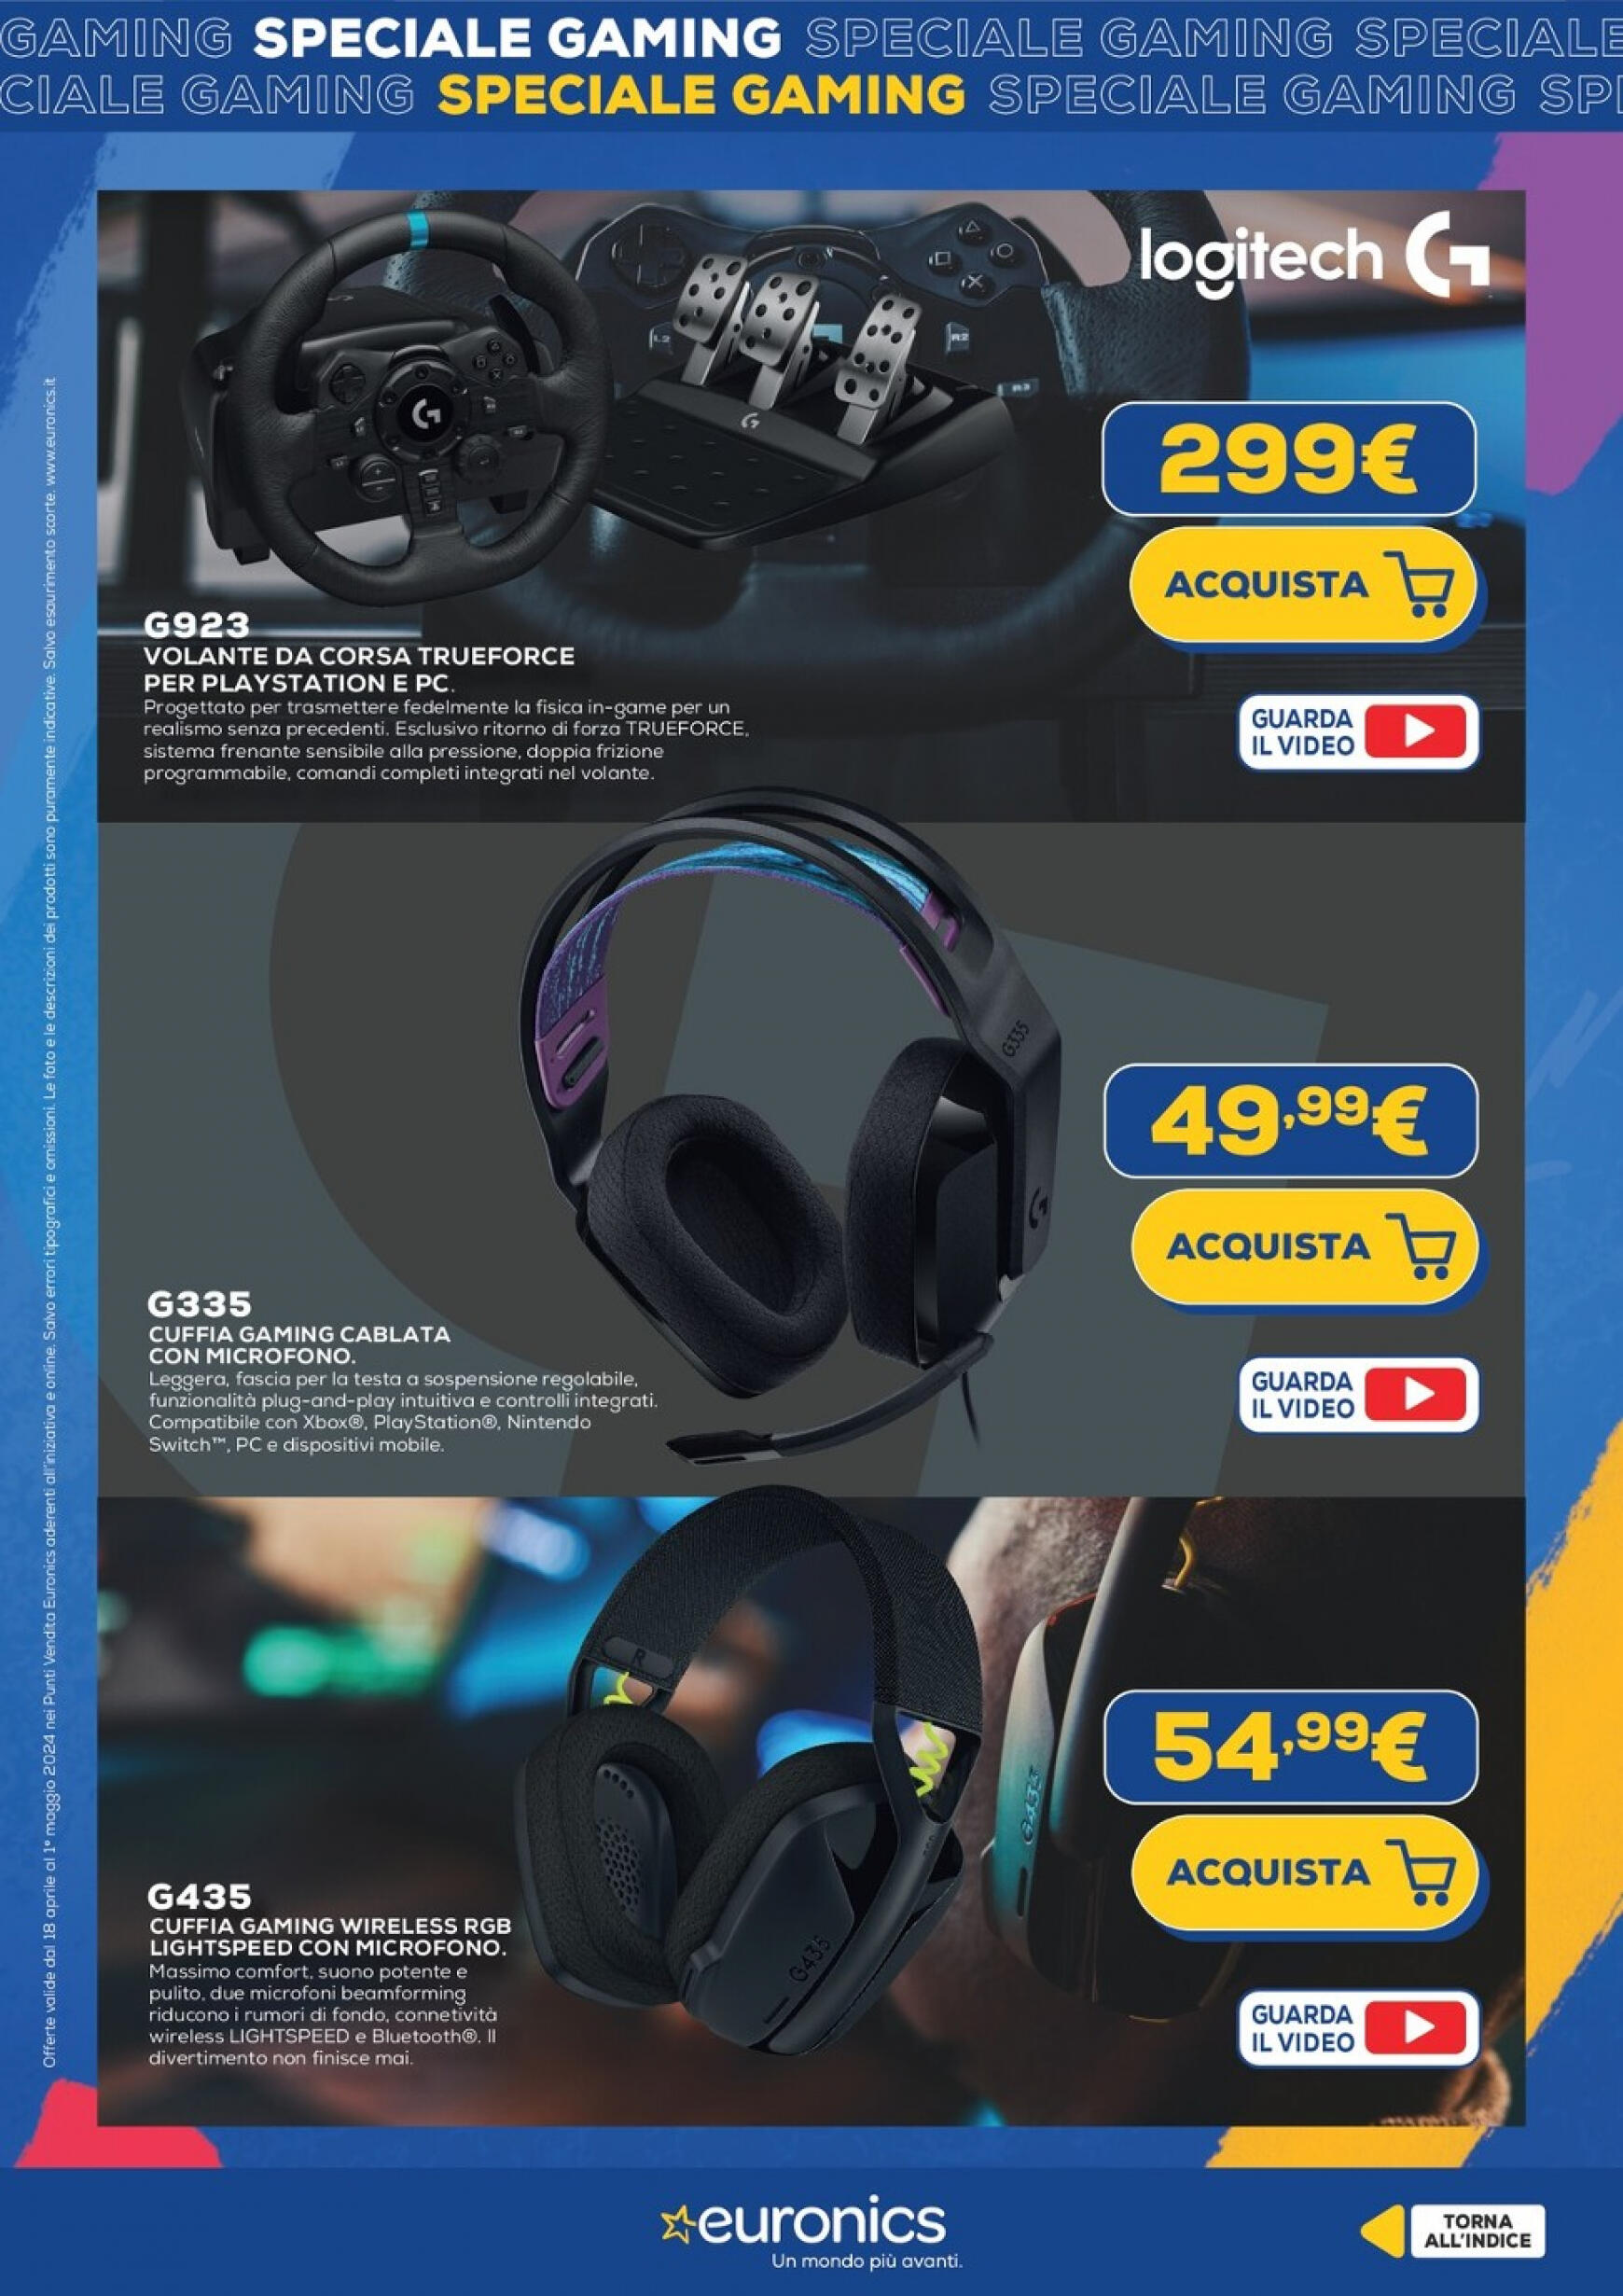 euronics - Nuovo volantino Euronics - Speciale Gaming 18.04. - 01.05. - page: 12